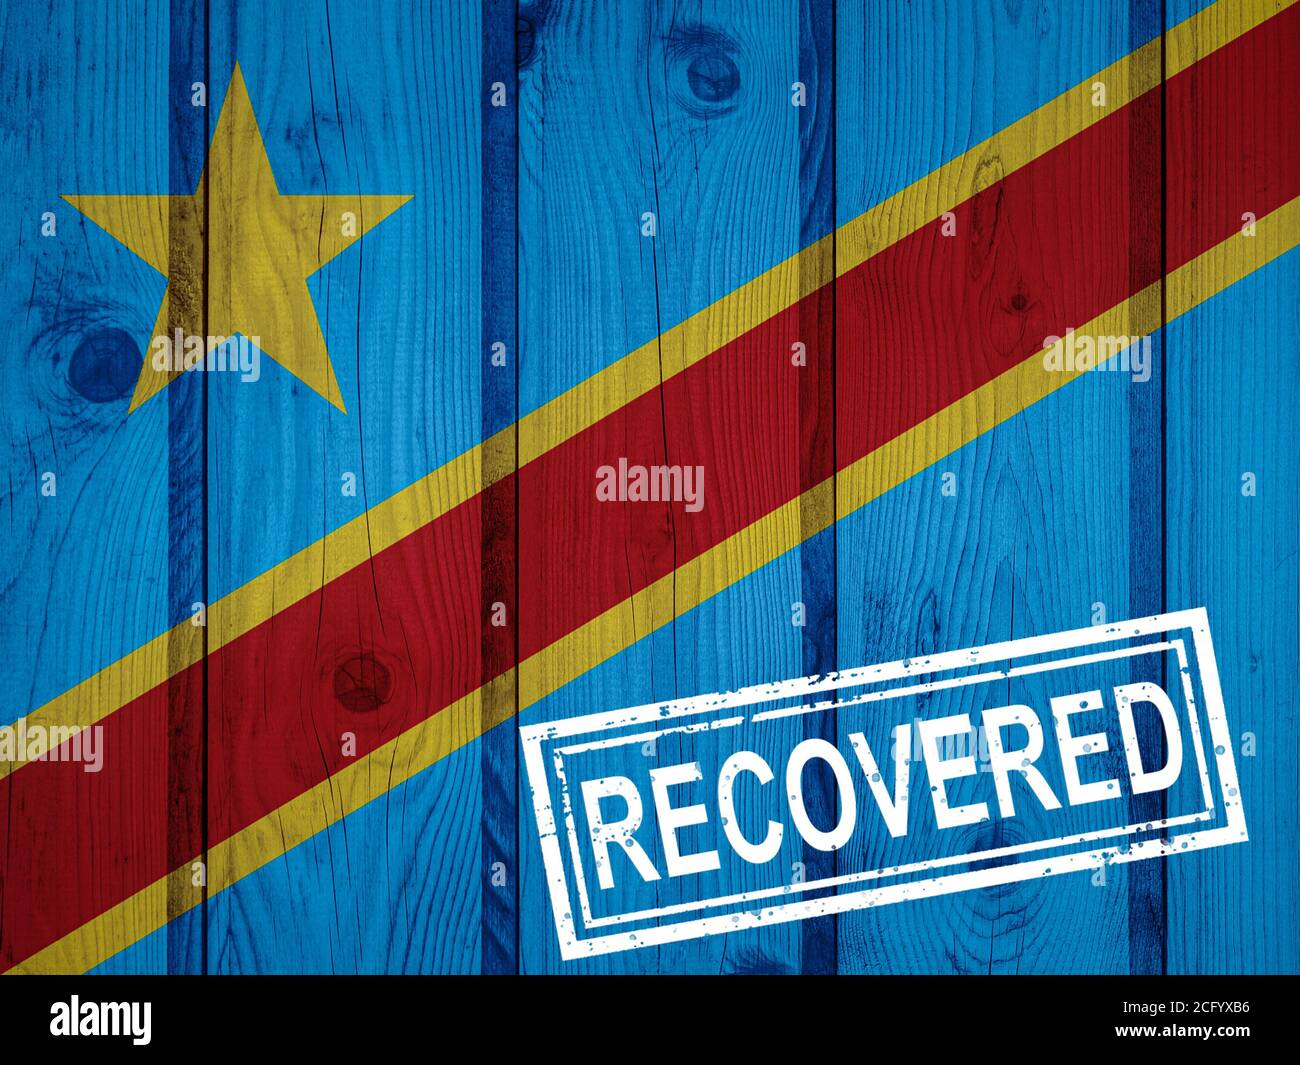 flag of Democratic Republic of the Congo that survived or recovered from the infections of corona virus epidemic or coronavirus. Grunge flag with stam Stock Photo